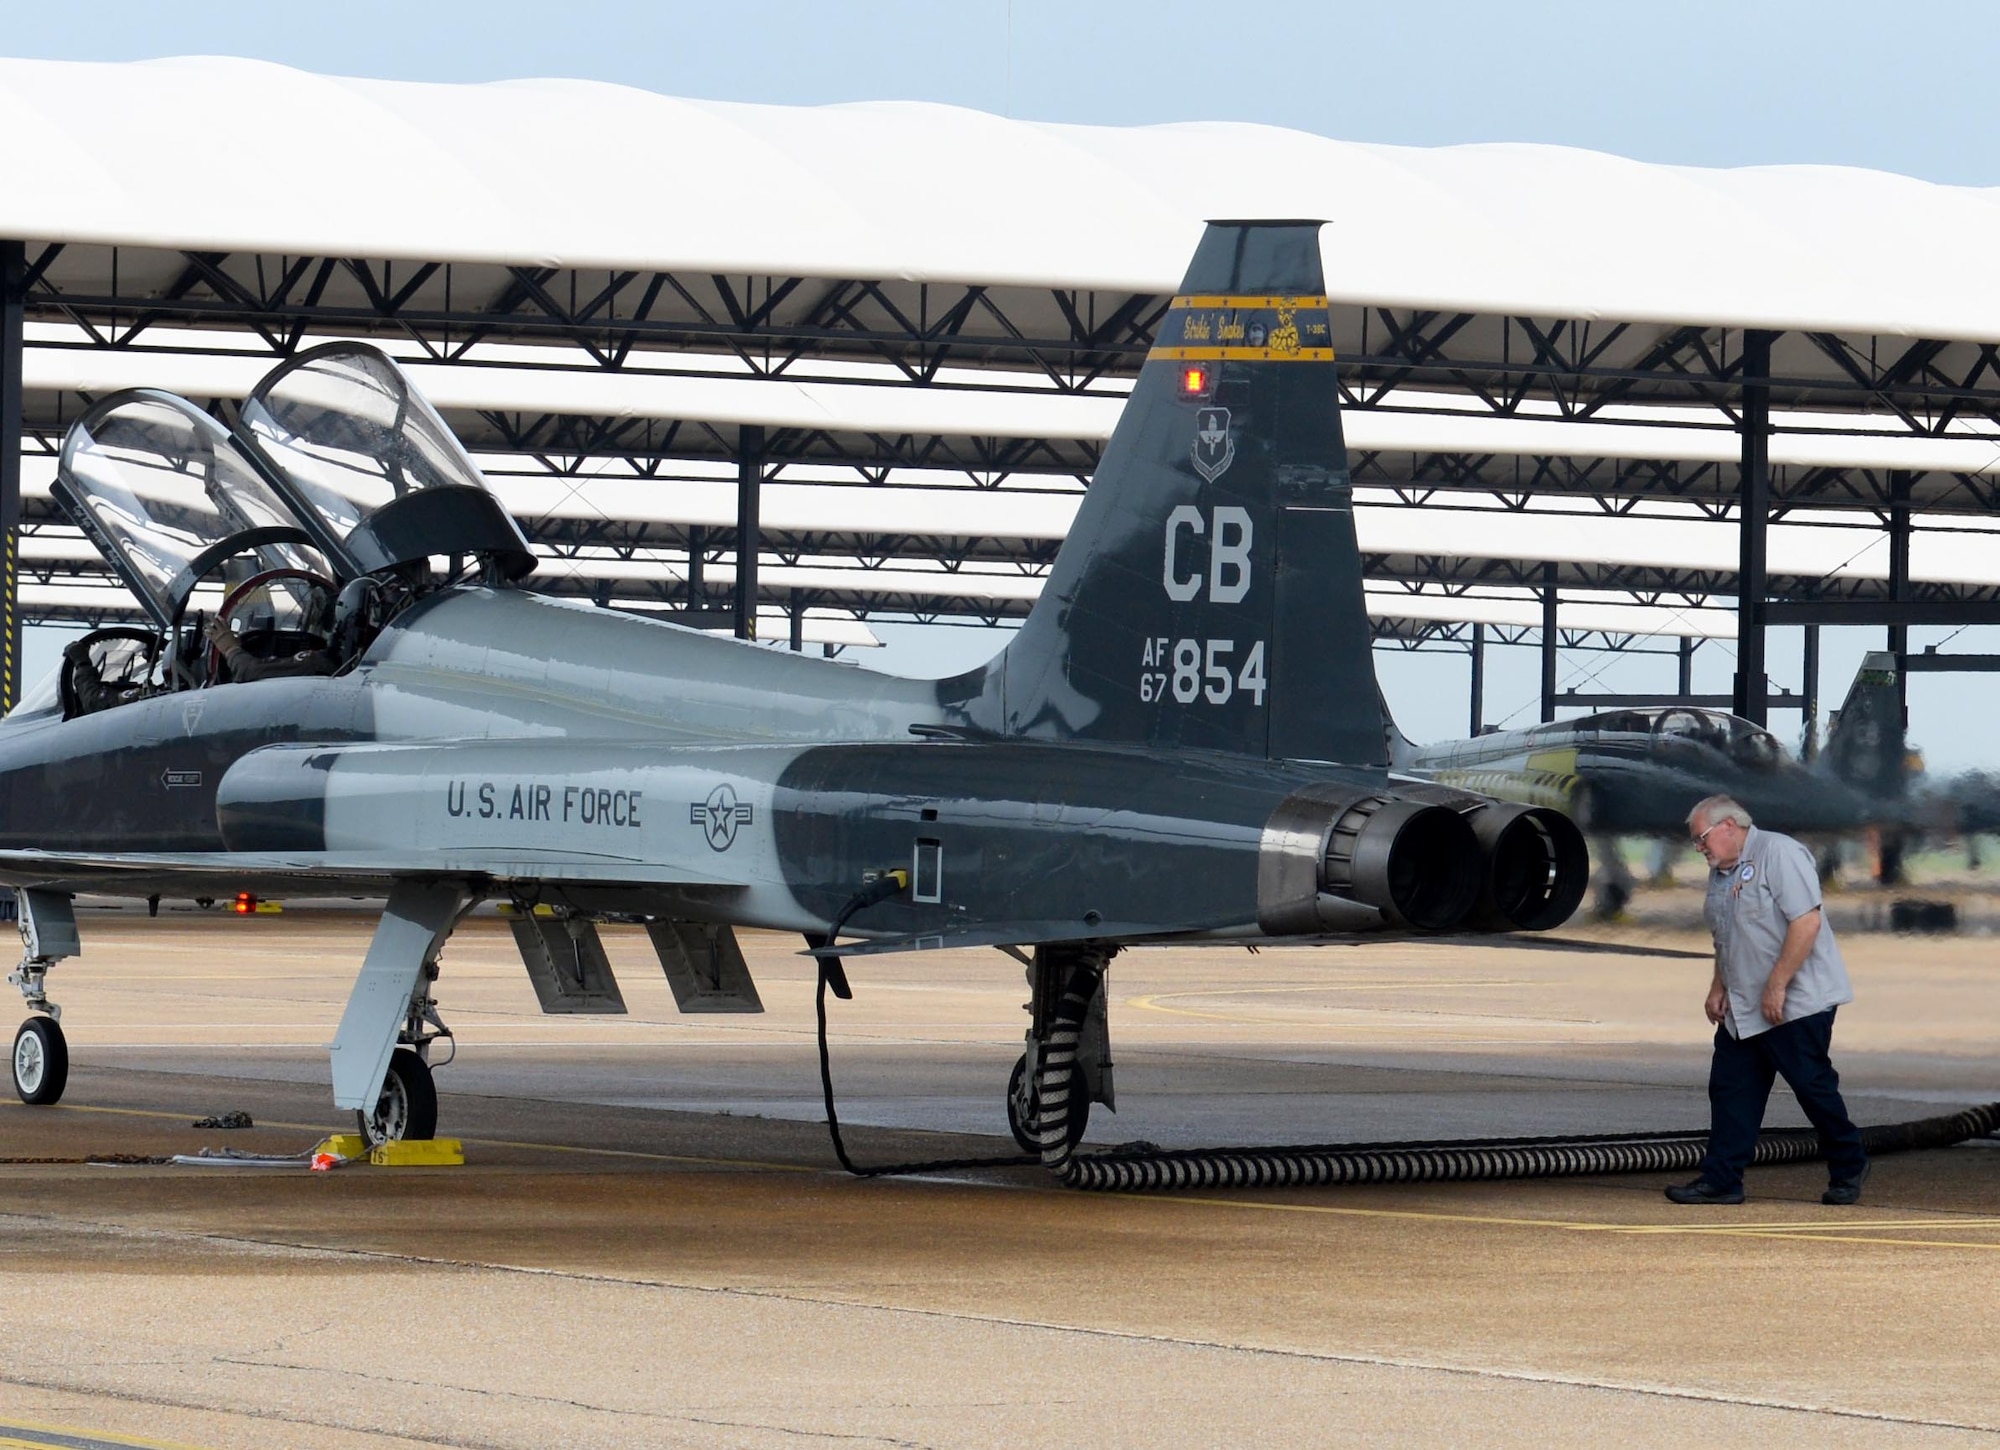 An M1 Support Services maintainer conducts preflight checks on a T-38 Talon, while two 14th Flying Training Wing pilots sit in the cockpit April 8, 2020, at Columbus Air Force Base, Miss. The Air Education and Training Command is the primary user of the T-38 for joint specialized undergraduate pilot training. Pilot training has been deemed essential operations and continues amid the COVID-19 pandemic. (U.S. Air Force photo by Airman 1st Class Davis Donaldson)